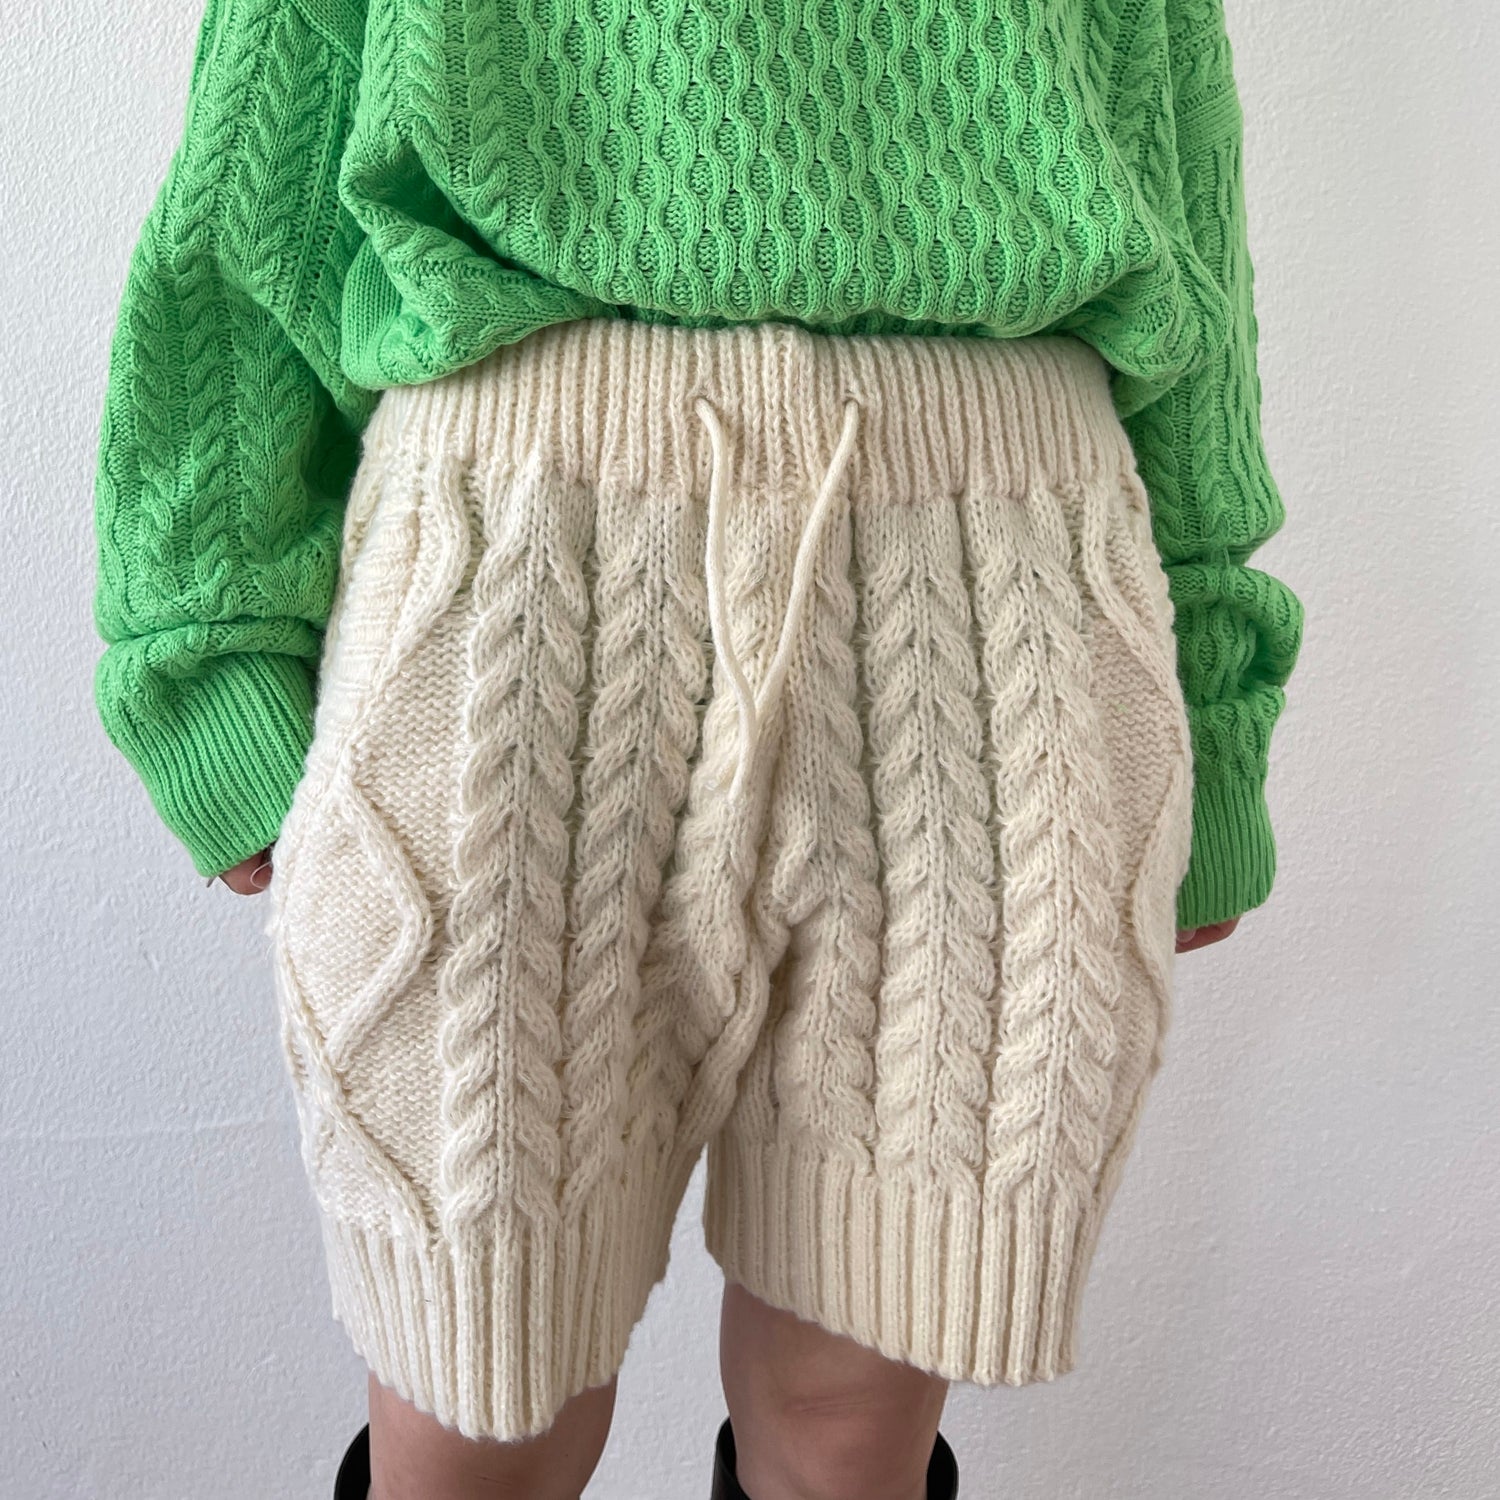 turtle neck cable knit set up / ivory